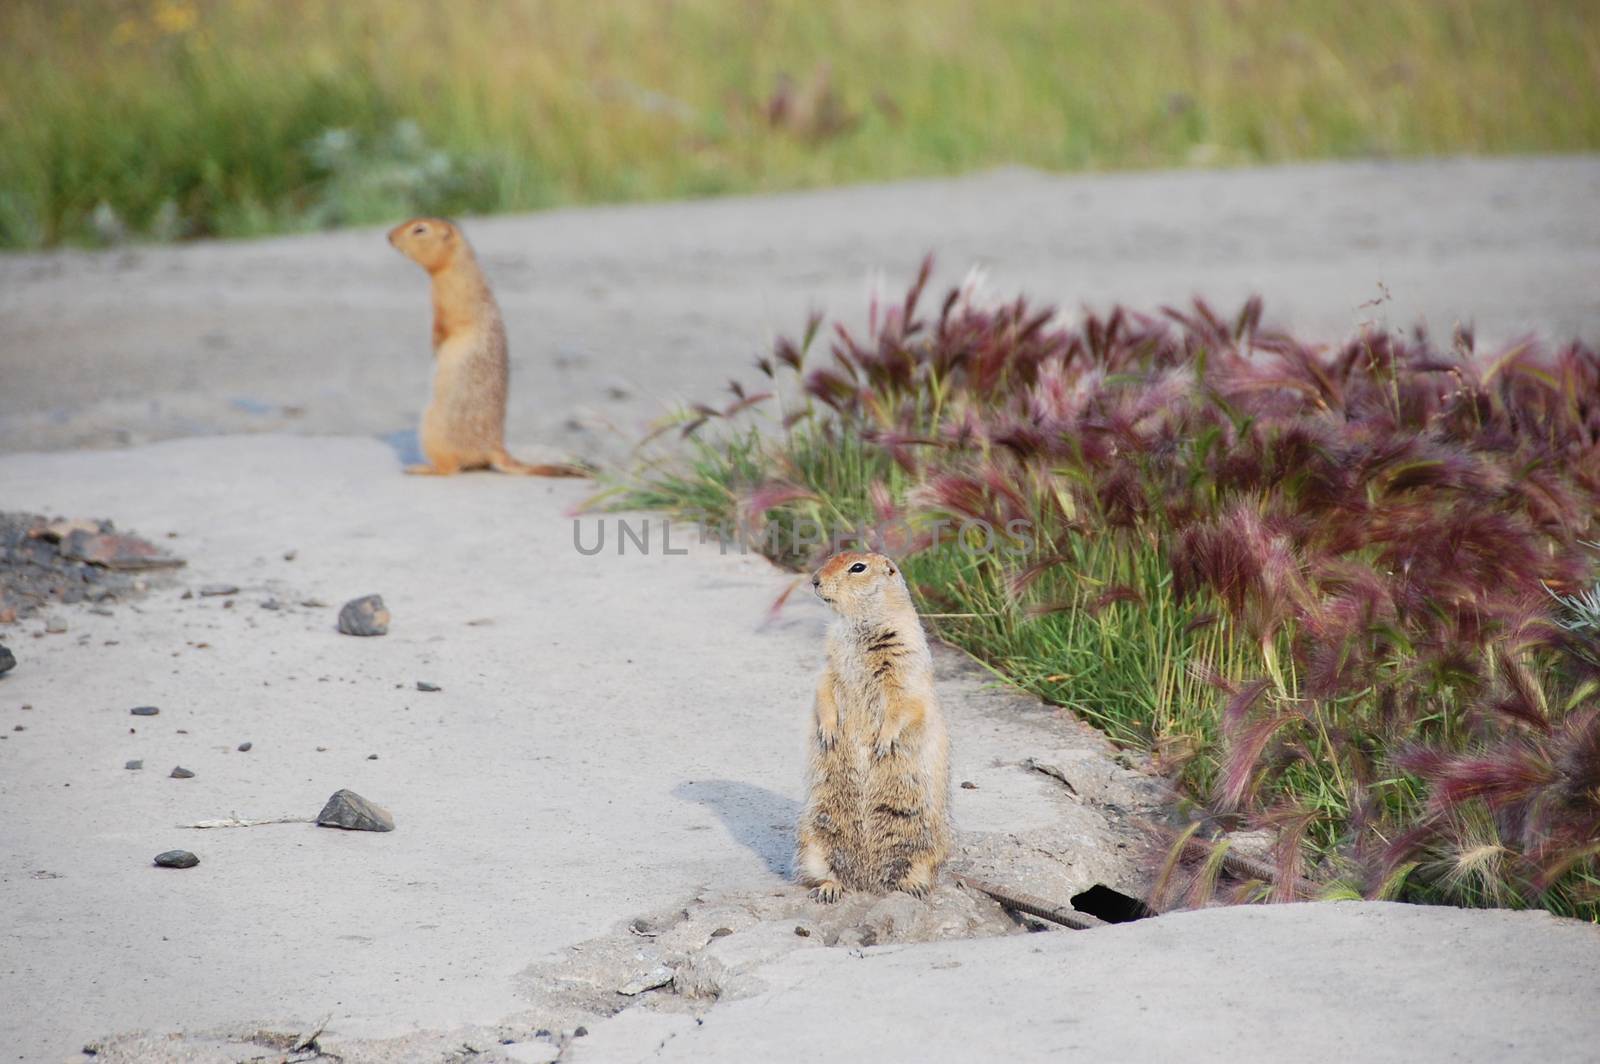 Arctic ground squirrels at roadside by danemo